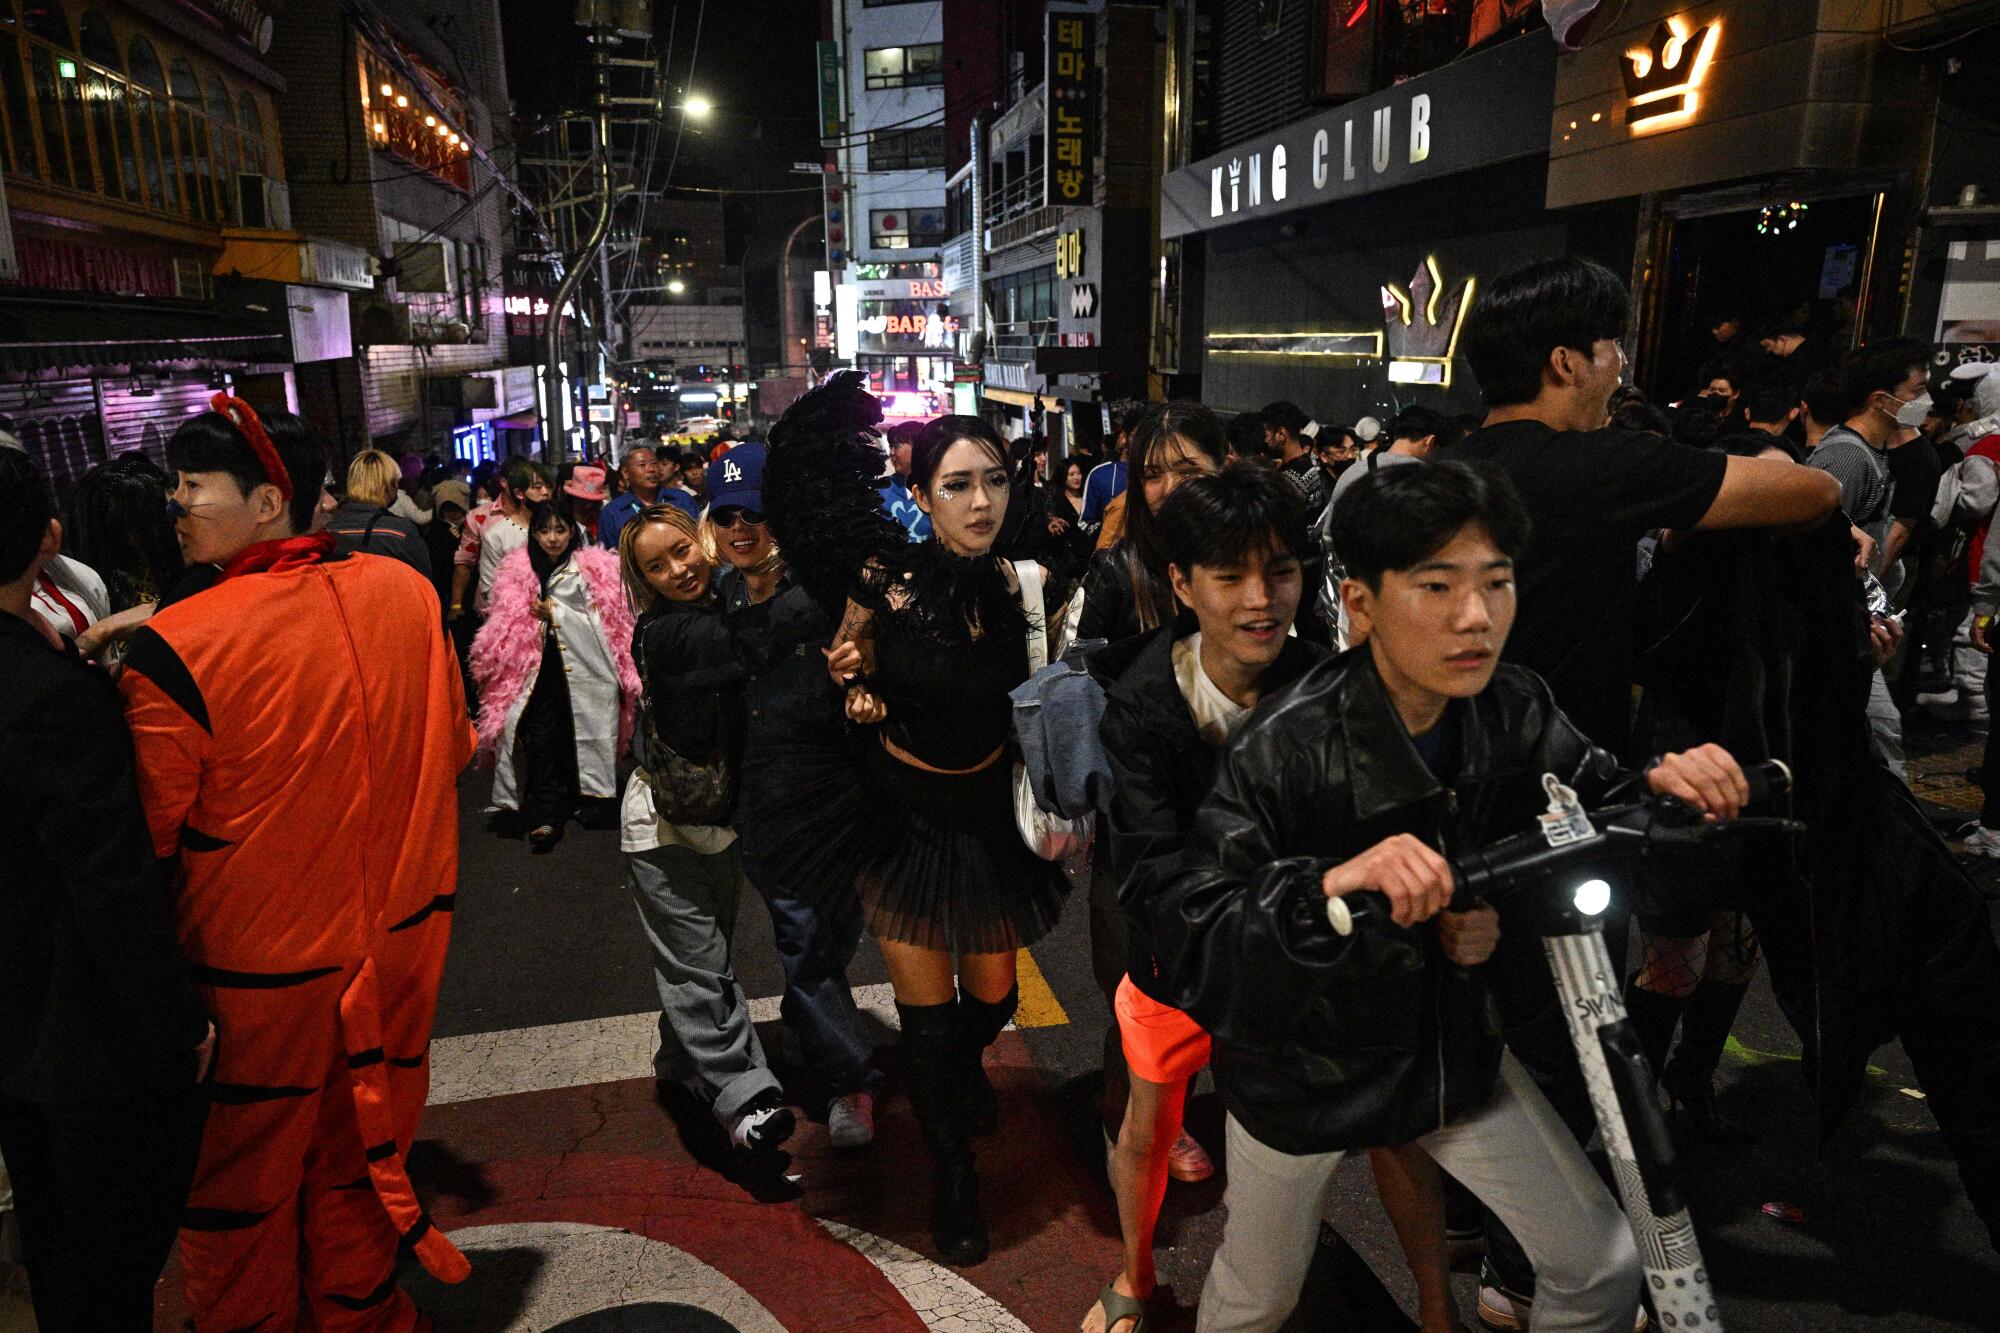 Revelers, some in costume, on a crowded street at night 